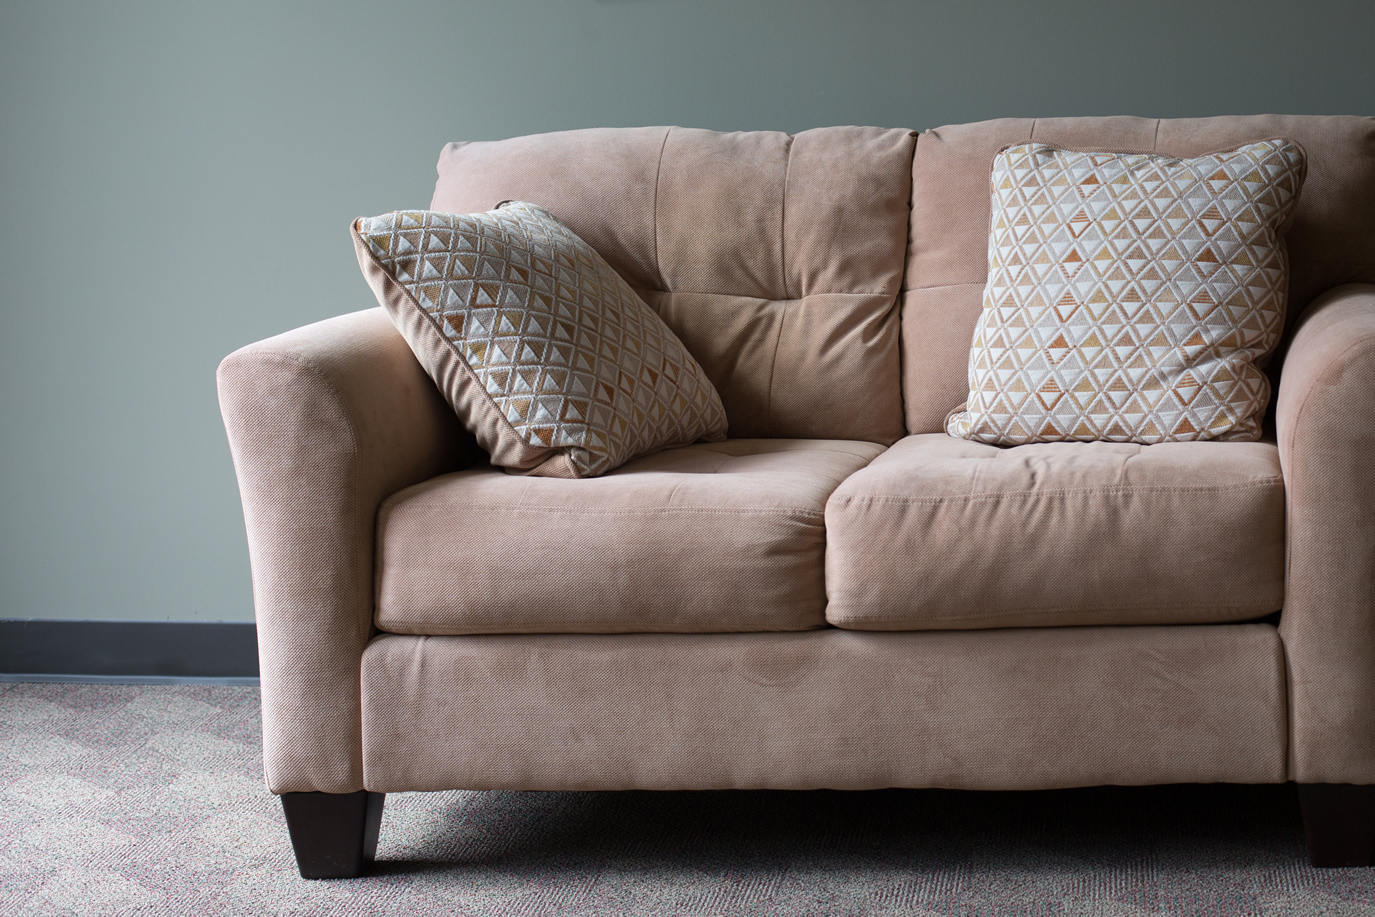 upholstery-couch